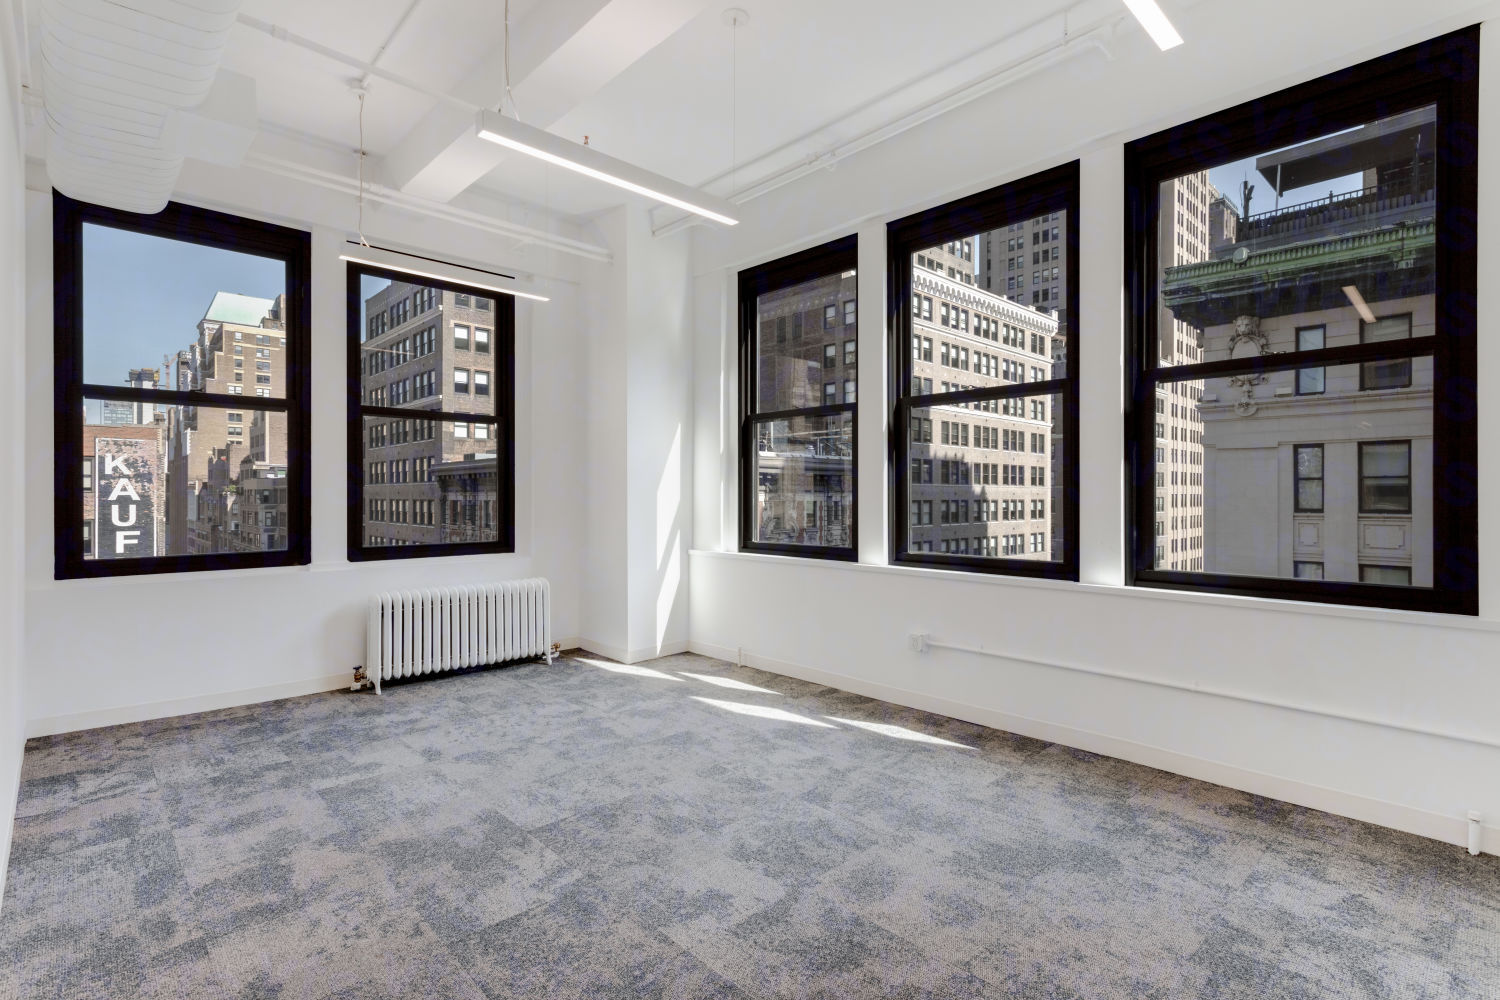 469 Seventh Ave, New York, NY 10018 - Office for Lease